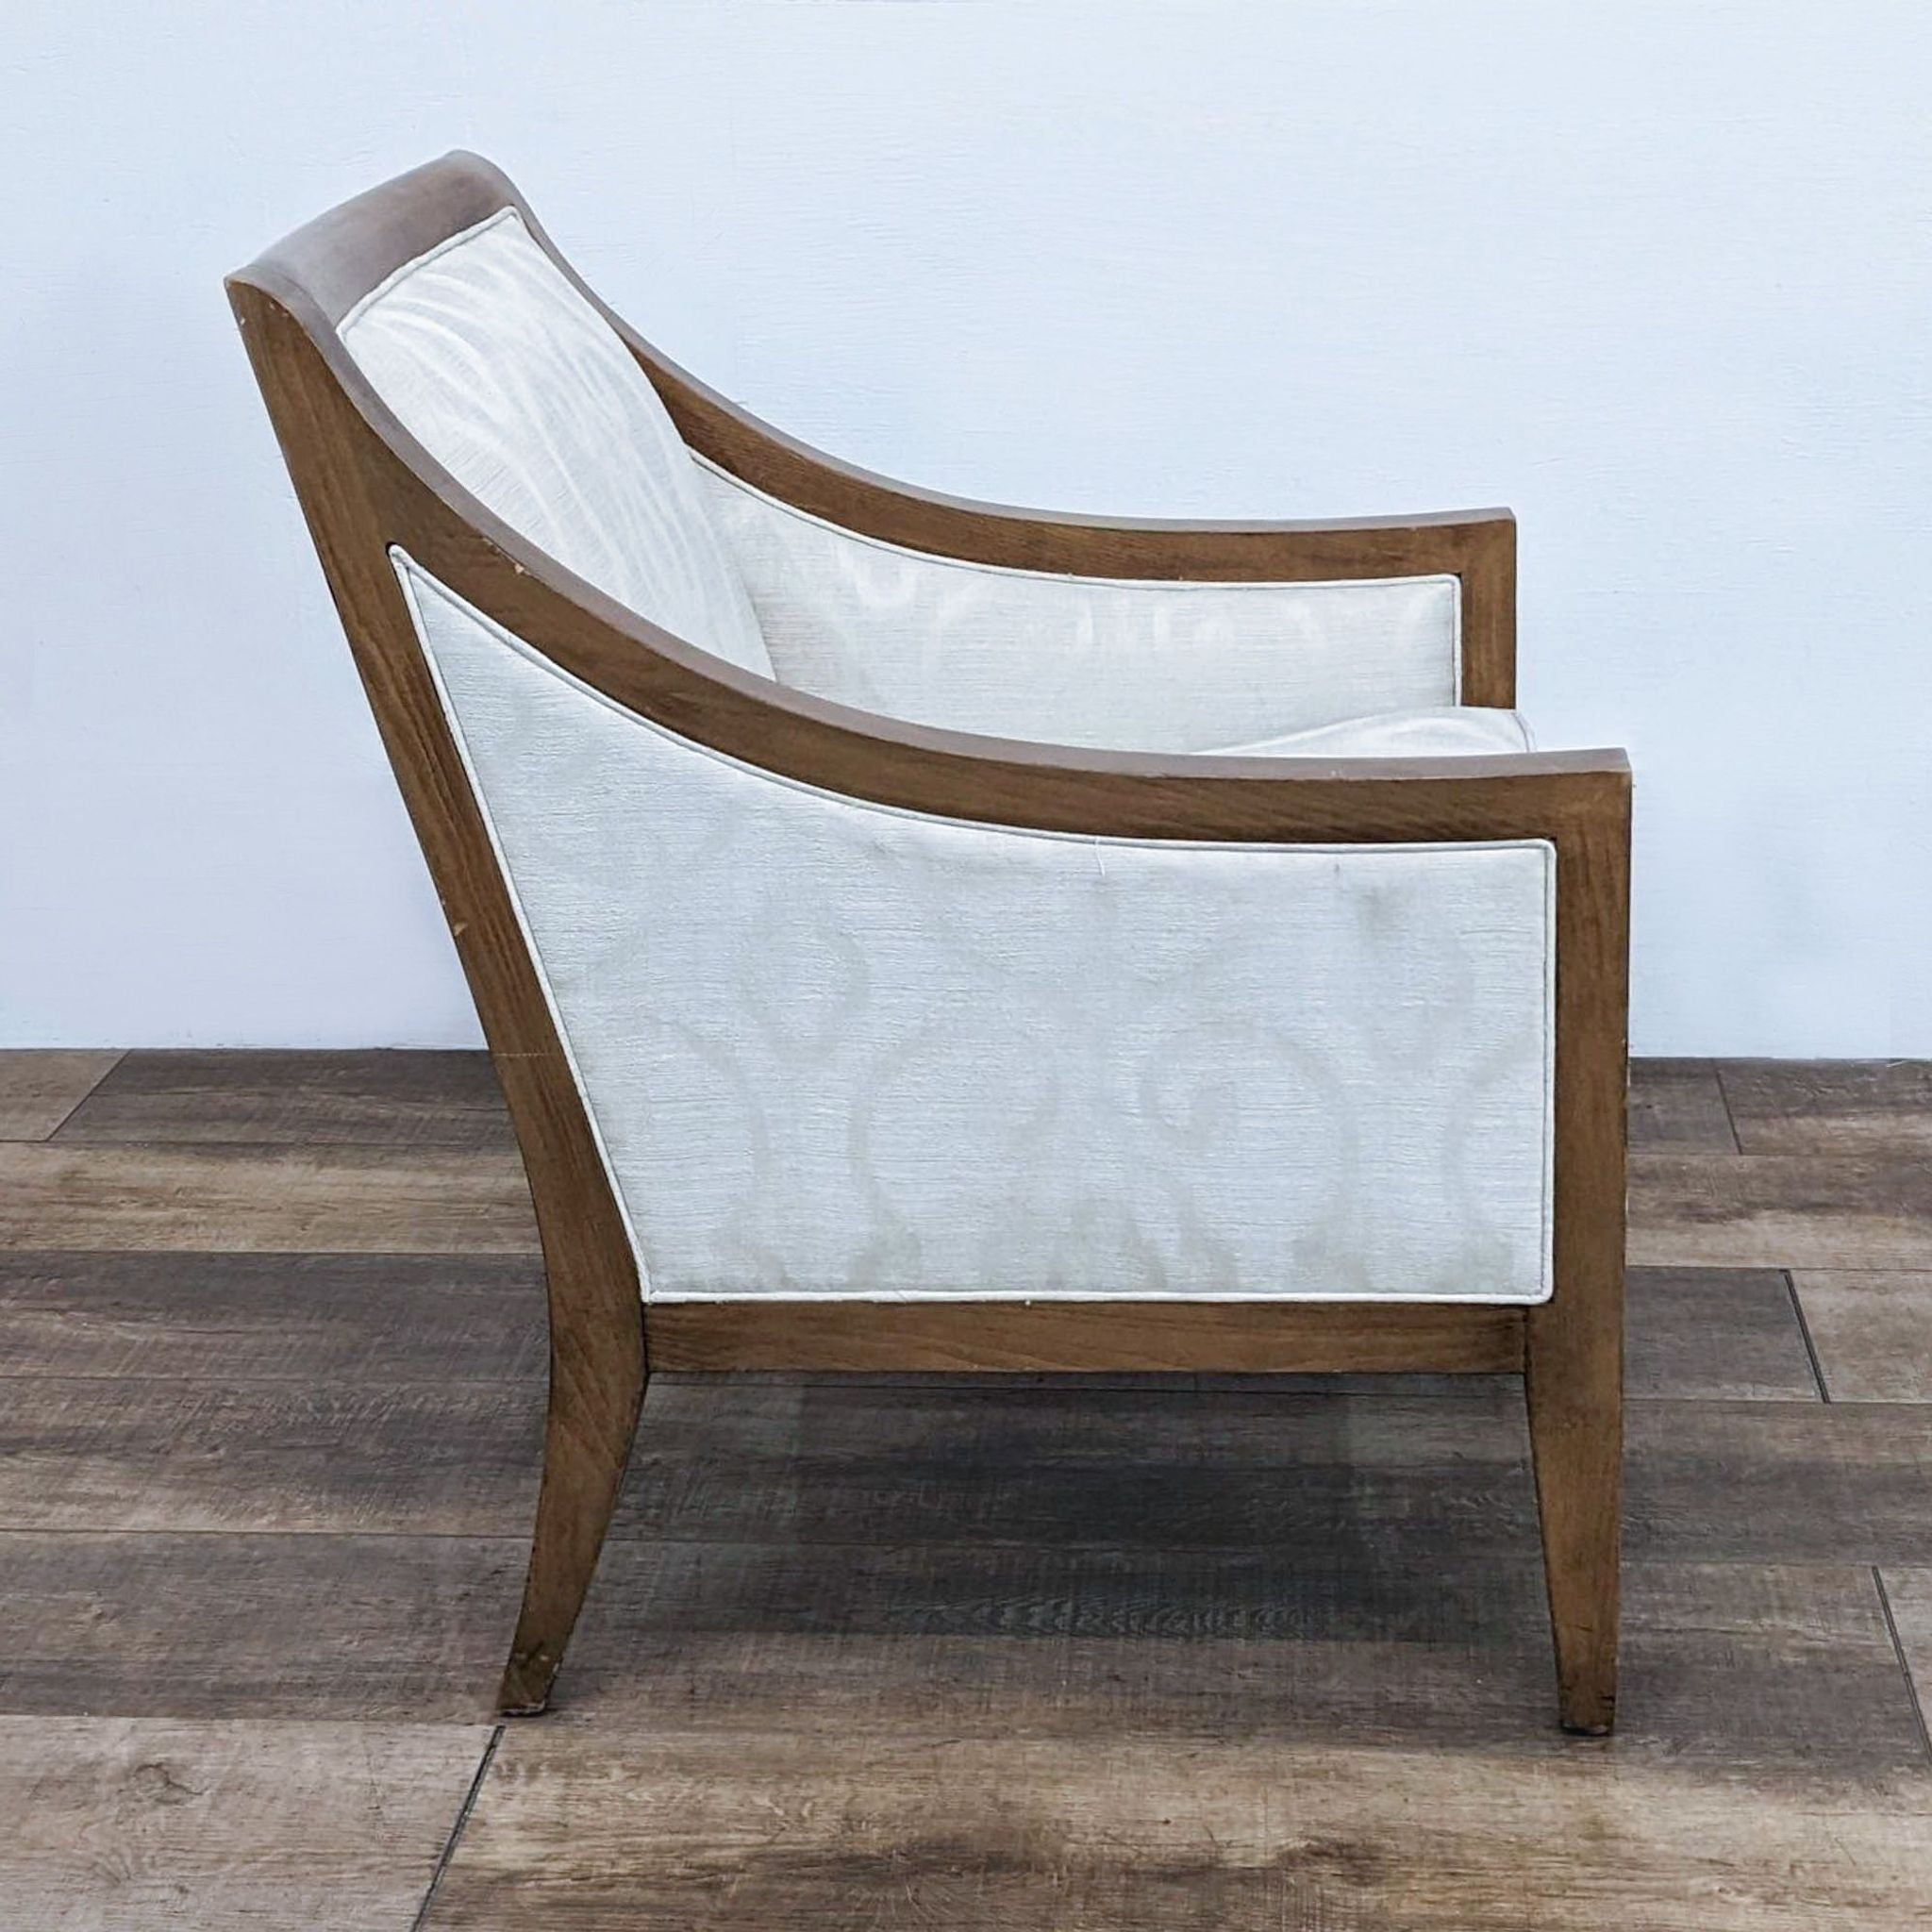 Side angle of H.D. Buttercup lounge chair showing wood frame and patterned white upholstery with a focus on the chair’s armrest.